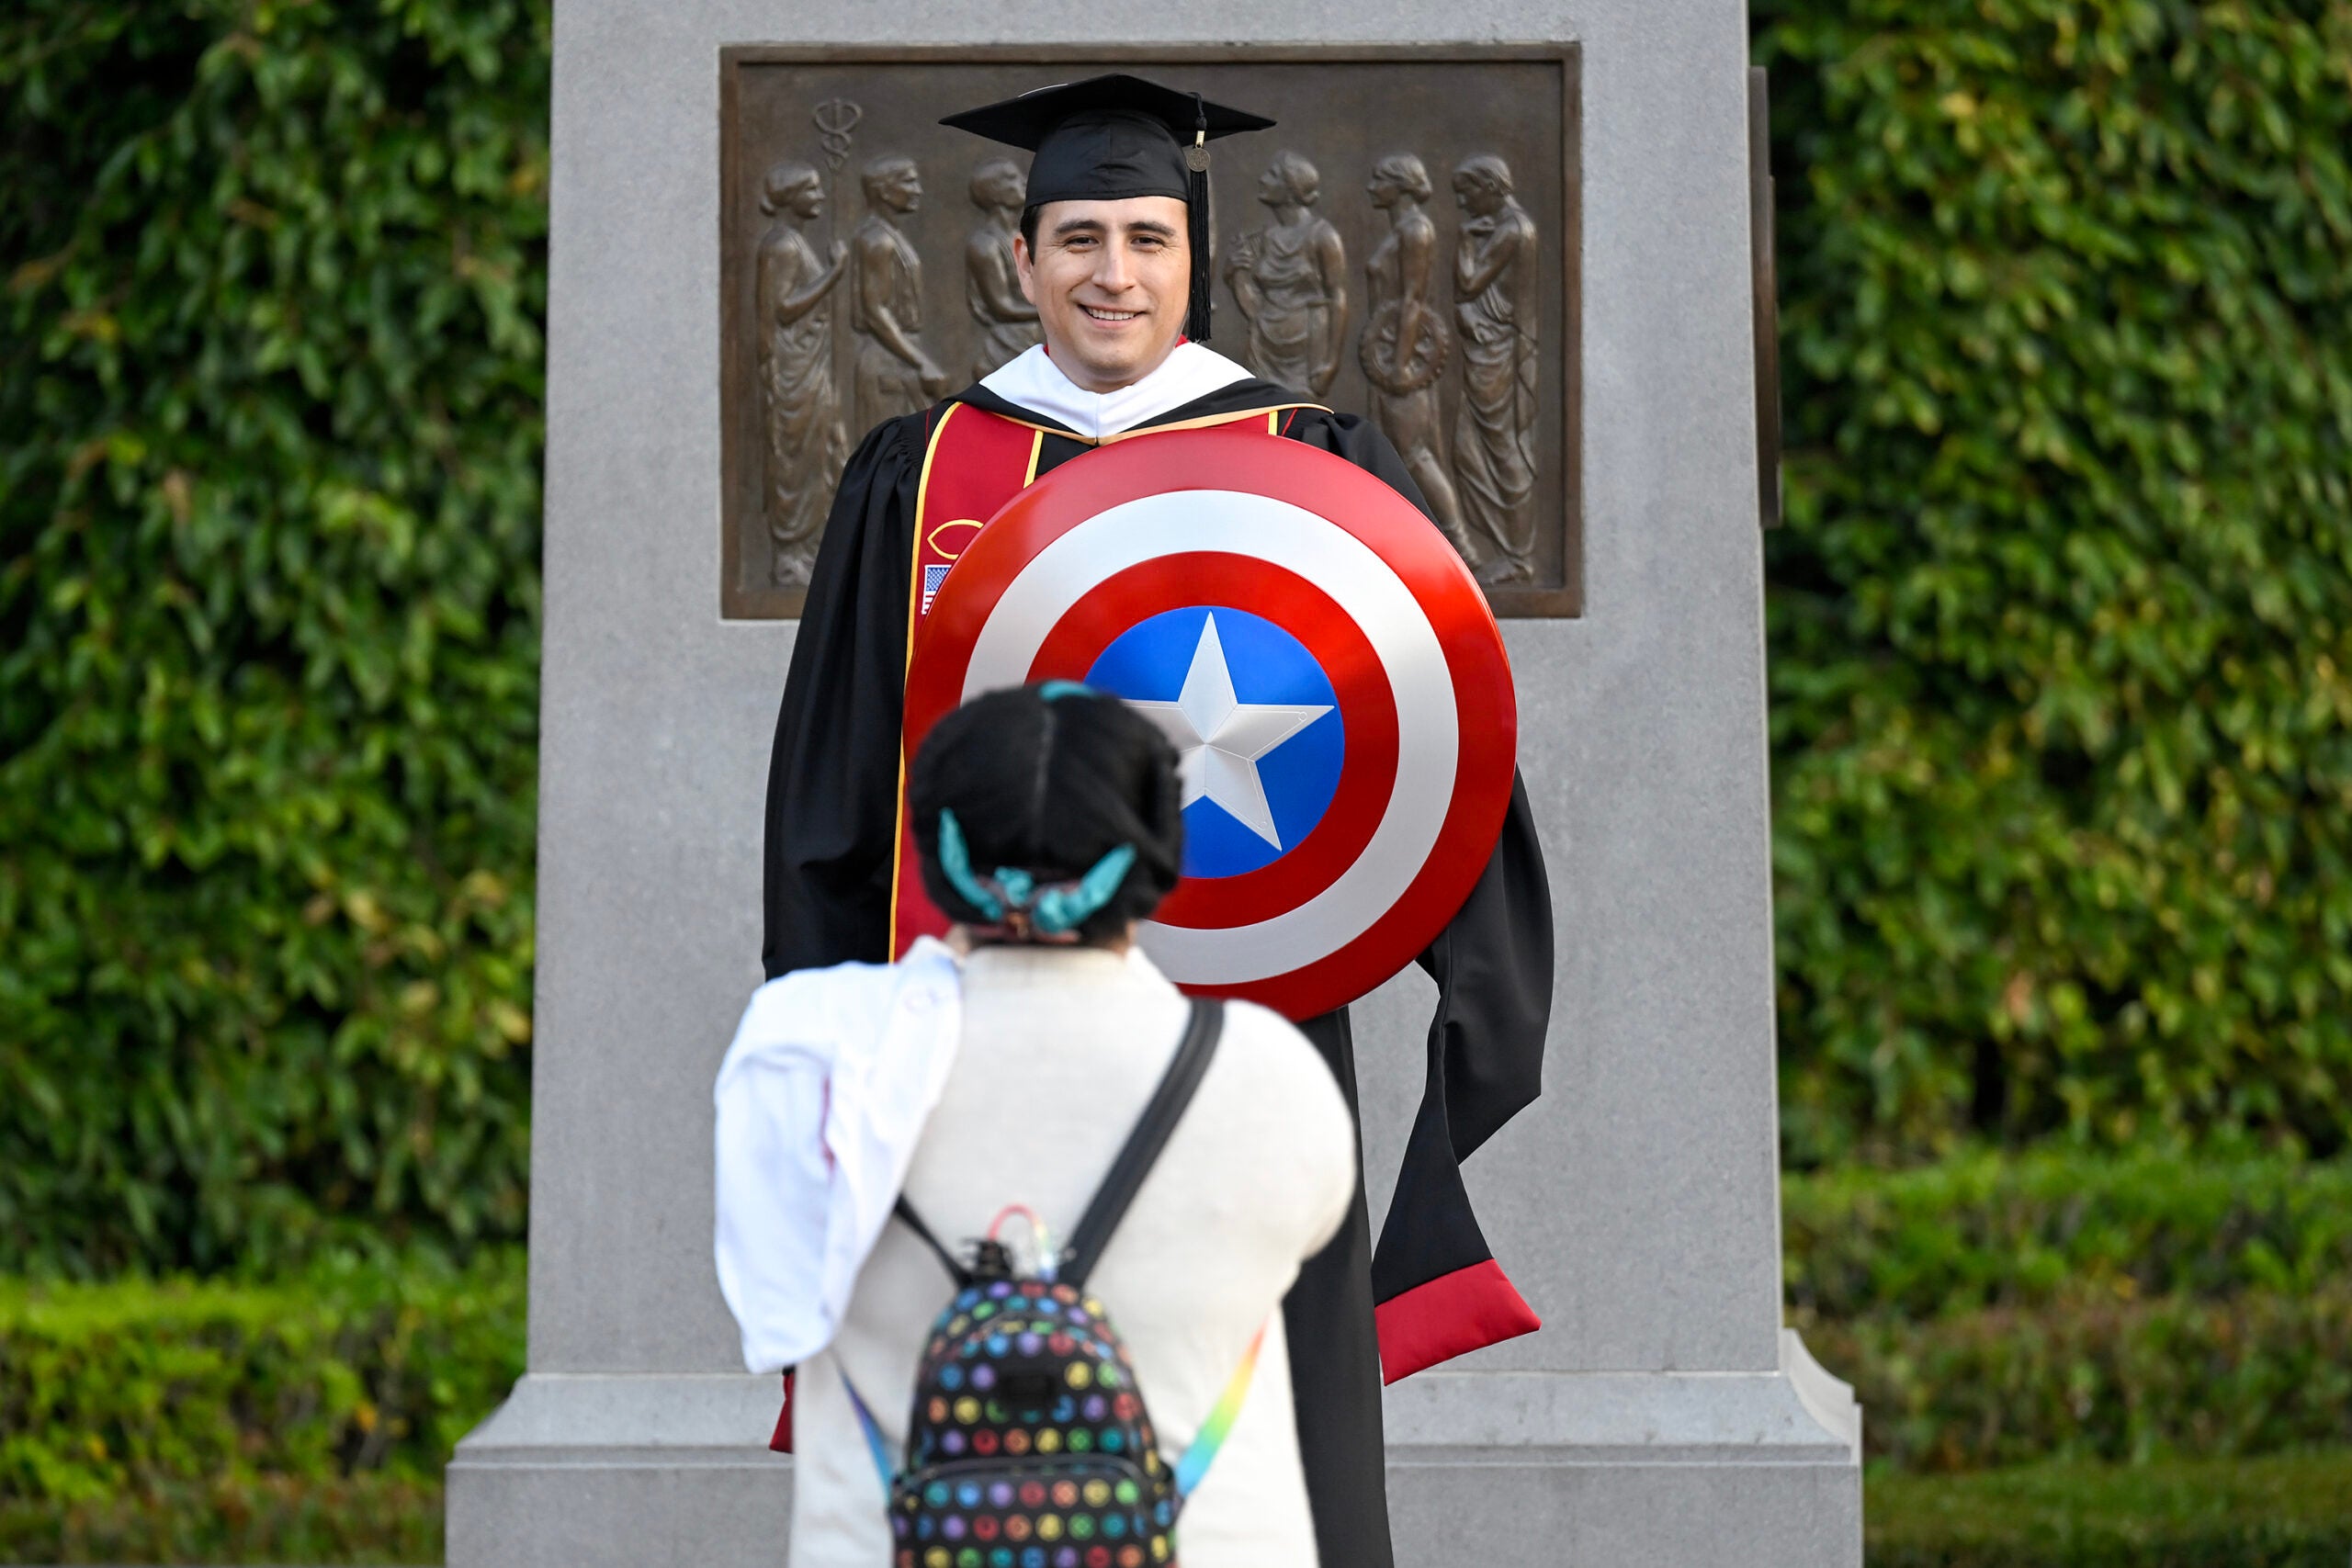 Graduate and Avengers fan Charles Hughes has his girlfriend Joanna Teeson take a picture of him with his Captain America shield during the 140th commencement ceremony at the University of Southern California, May 12, 2023. (Photo/Gus Ruelas)